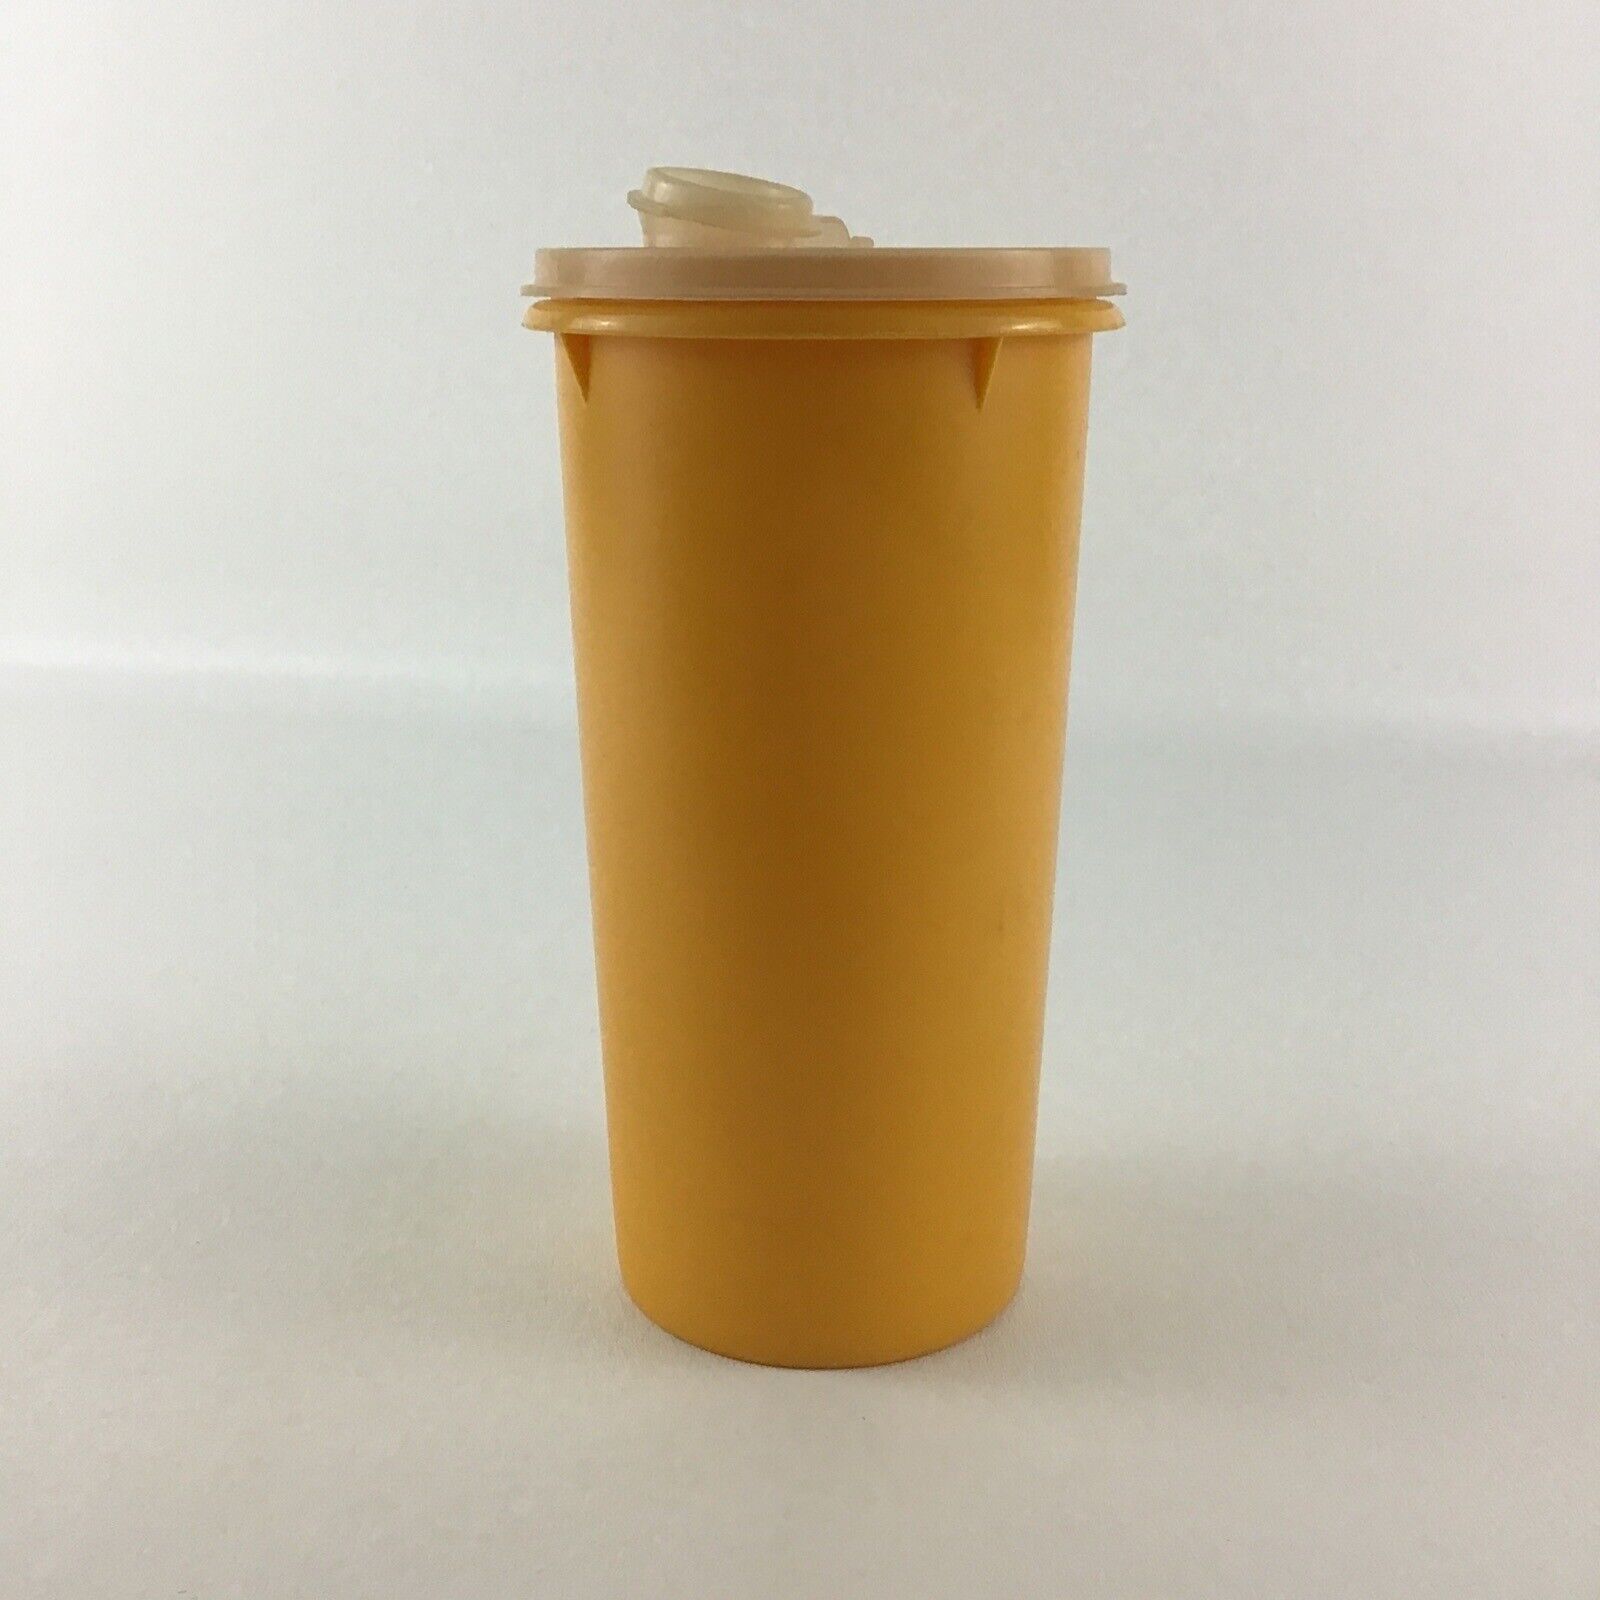 Tupperware Yellow Tall Beverage Container 261 Liquid Storage Lid Spout Vintage